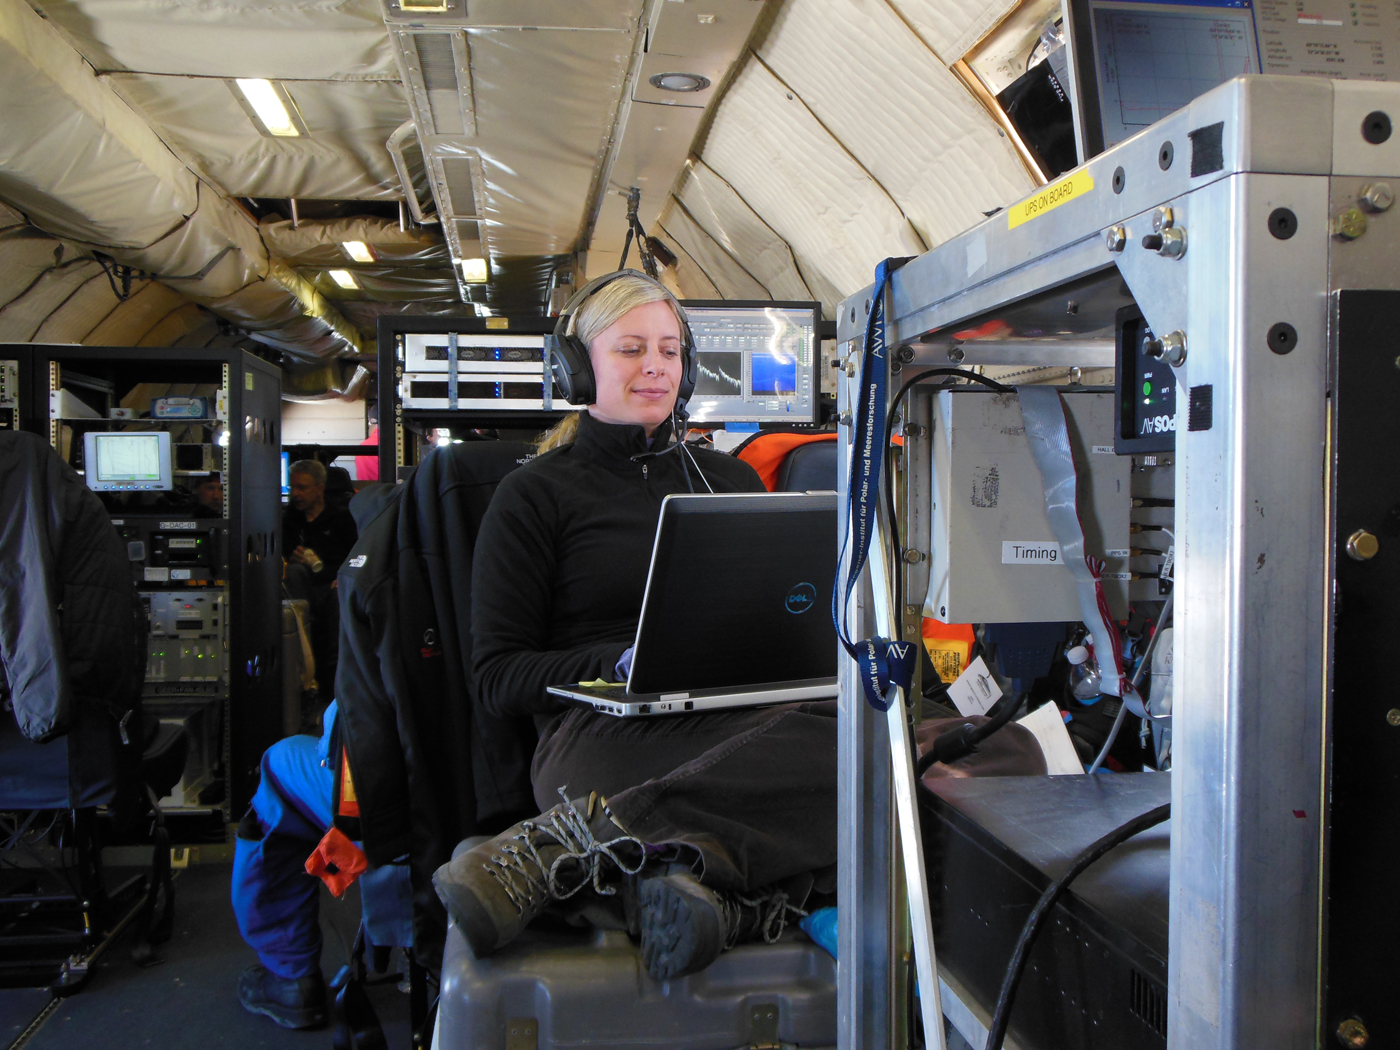 Christy Hansen sits on a toolbox while she working on the Operation IceBridge flight. She is surrounded by various scientific instruments.